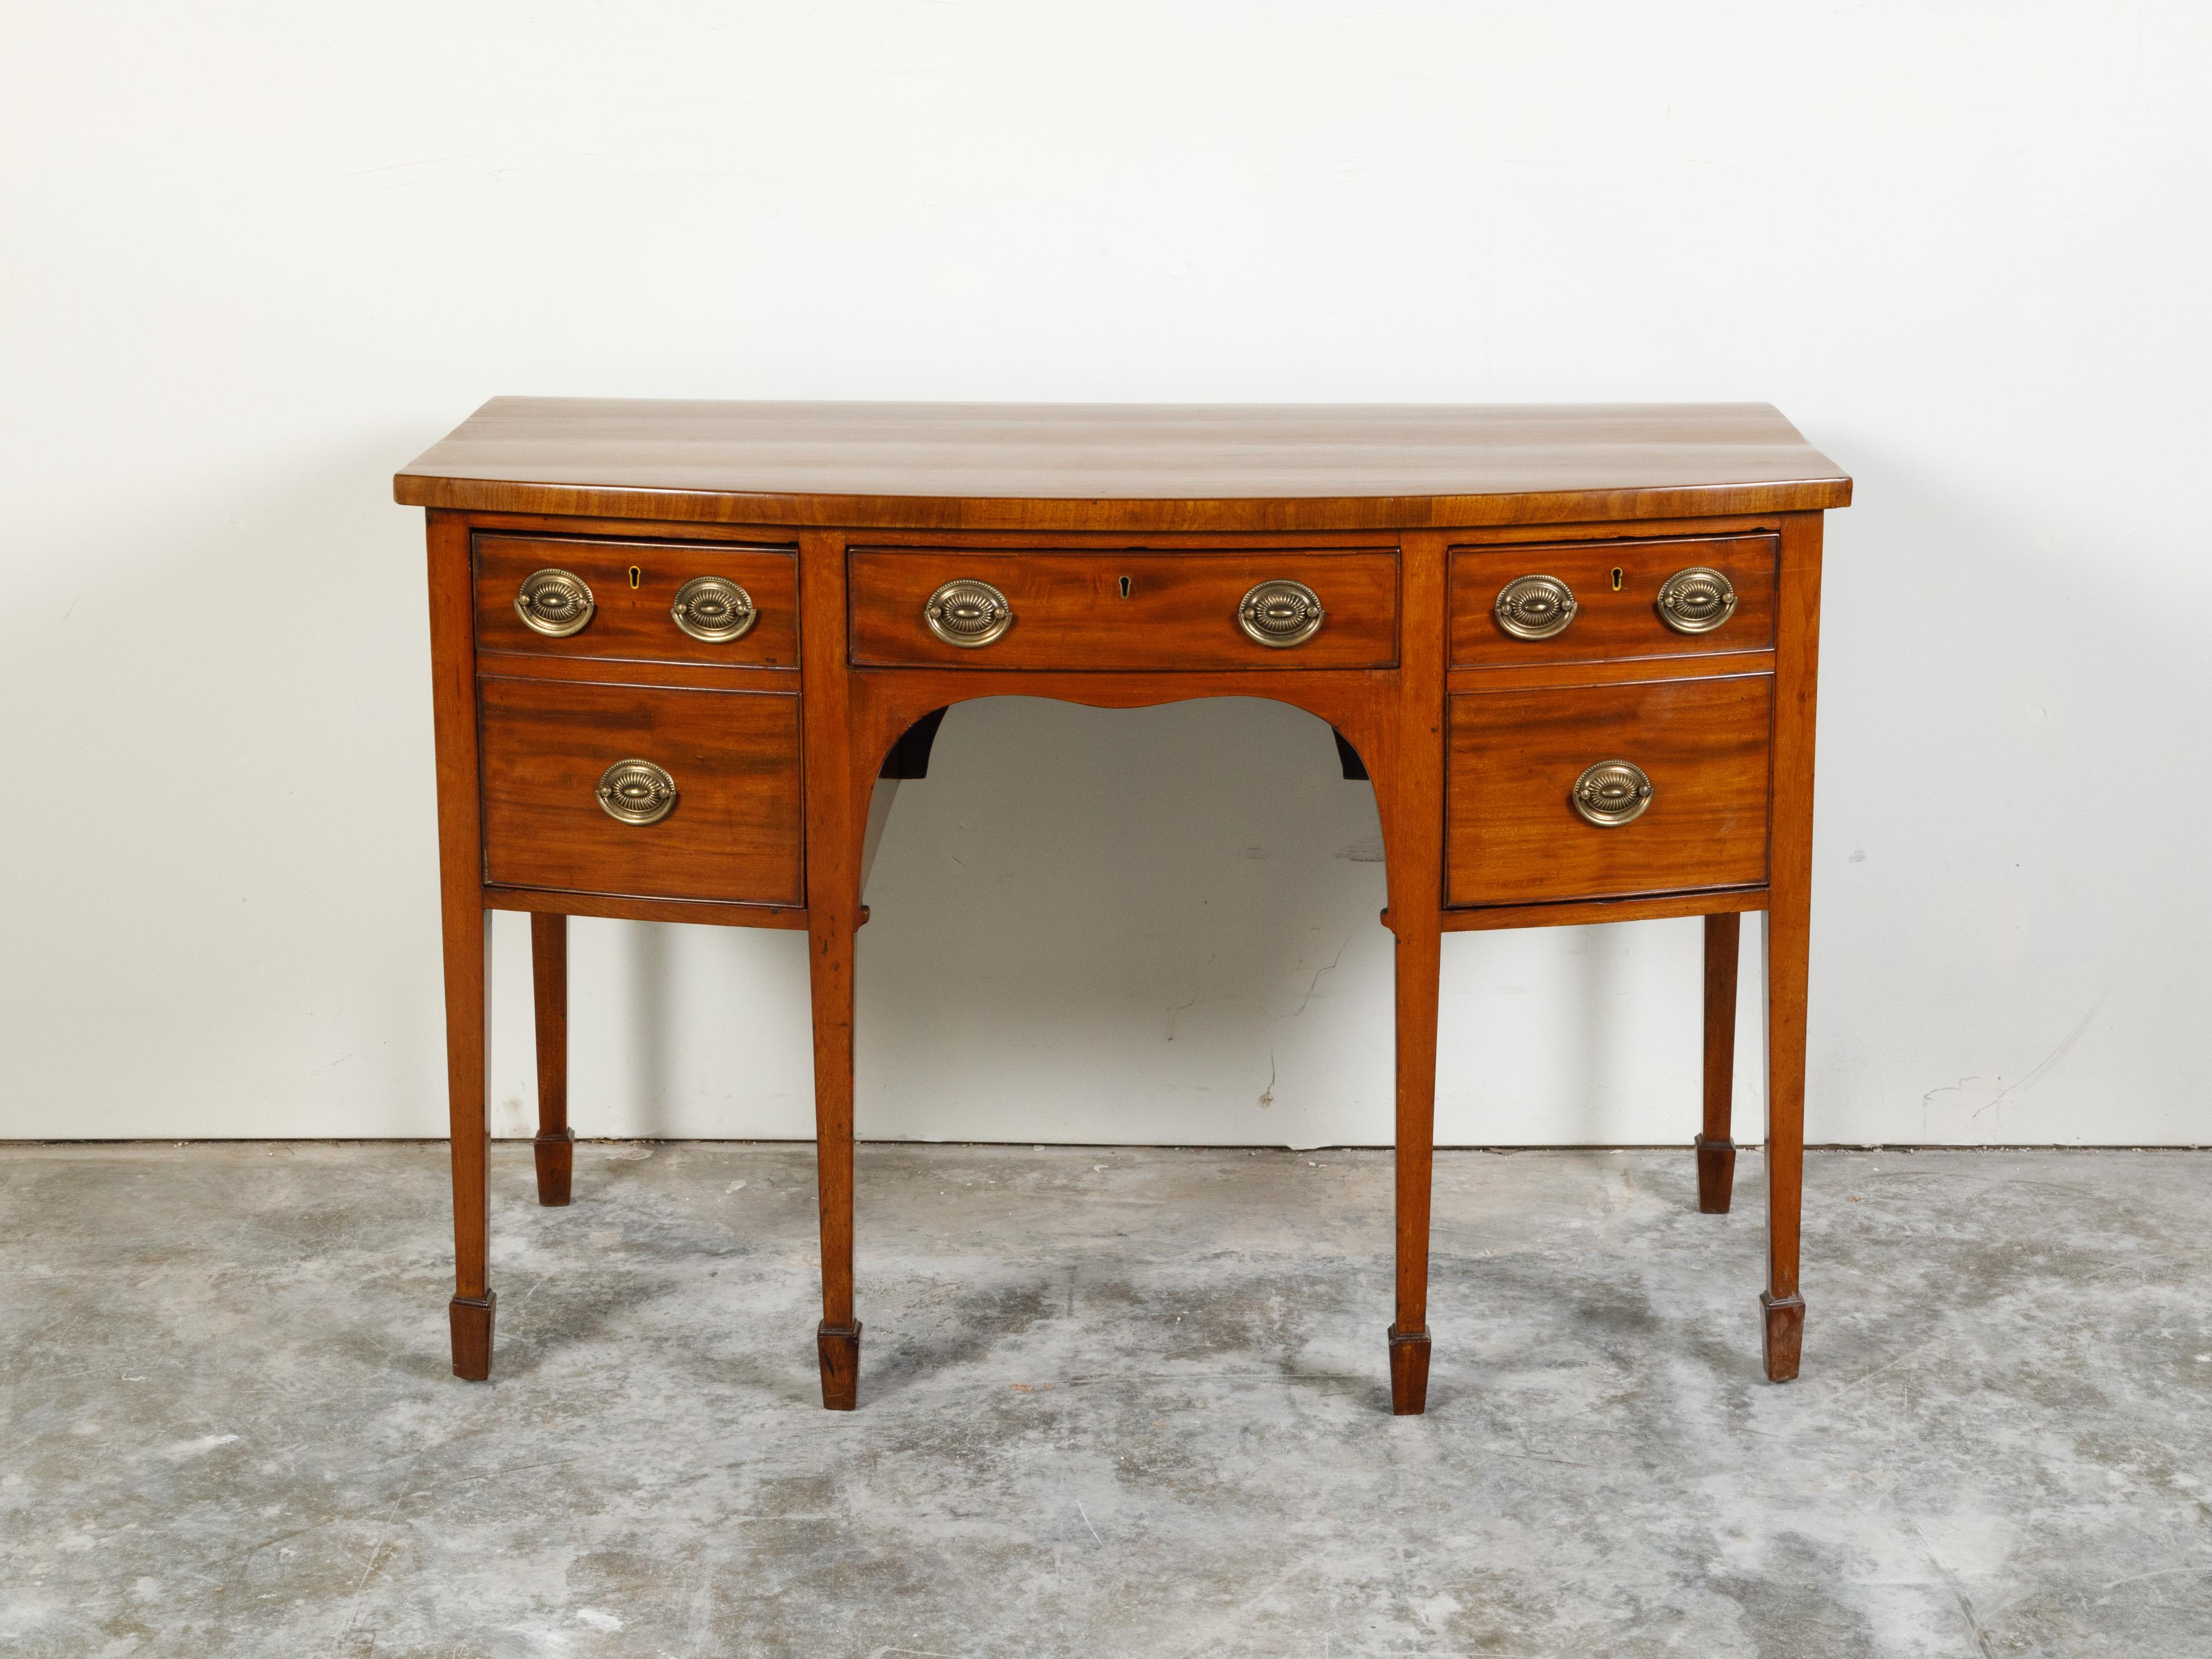 An English Georgian period mahogany sideboard from the early 19th century, with five drawers, tapered legs and spade feet. Created in England during the first quarter of the 19th century, this mahogany sideboard features a rectangular bow front top